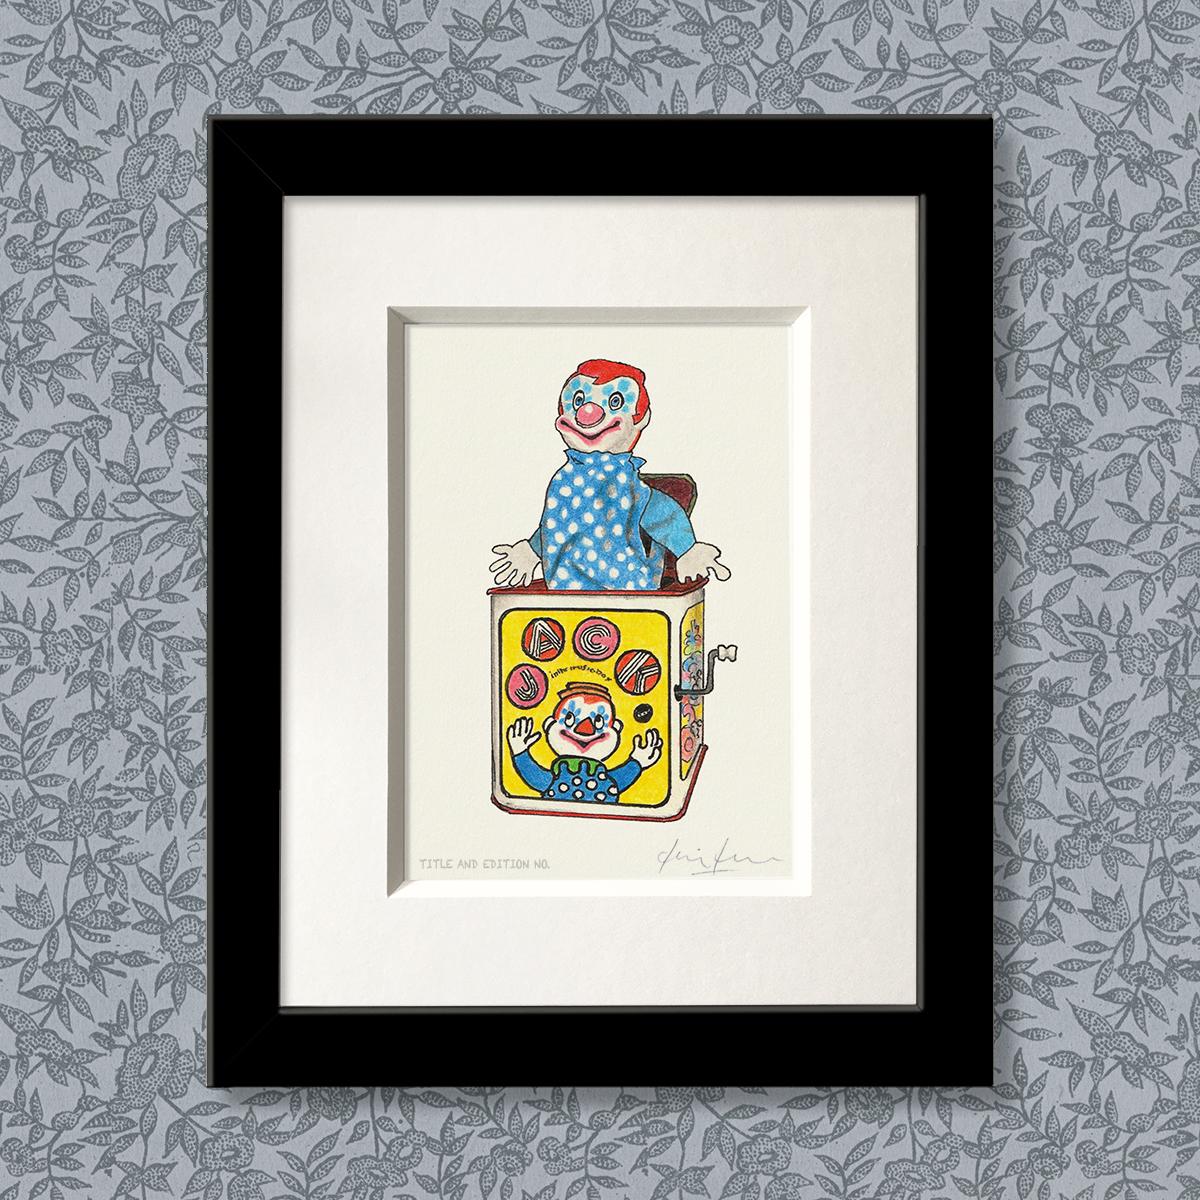 Limited edition print from a pen, ink and coloured pencil drawing of a Jack in the Box in a black frame